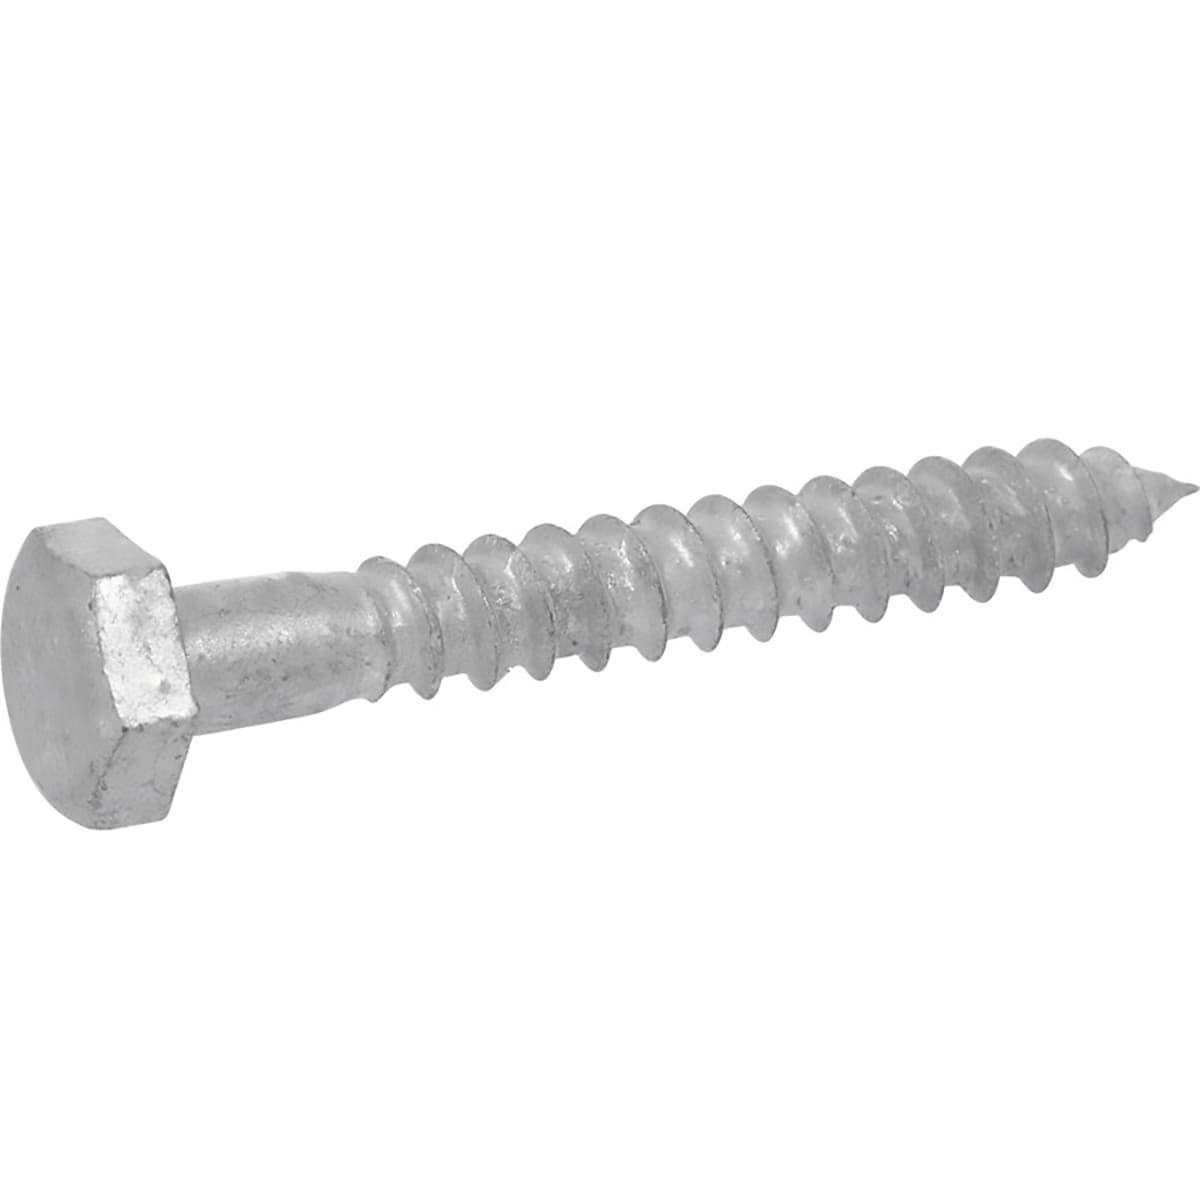 Lag Bolt Screw Hot Dipped Galvanized A307 Alloy Steel 3/8 x 2" Qty 50 